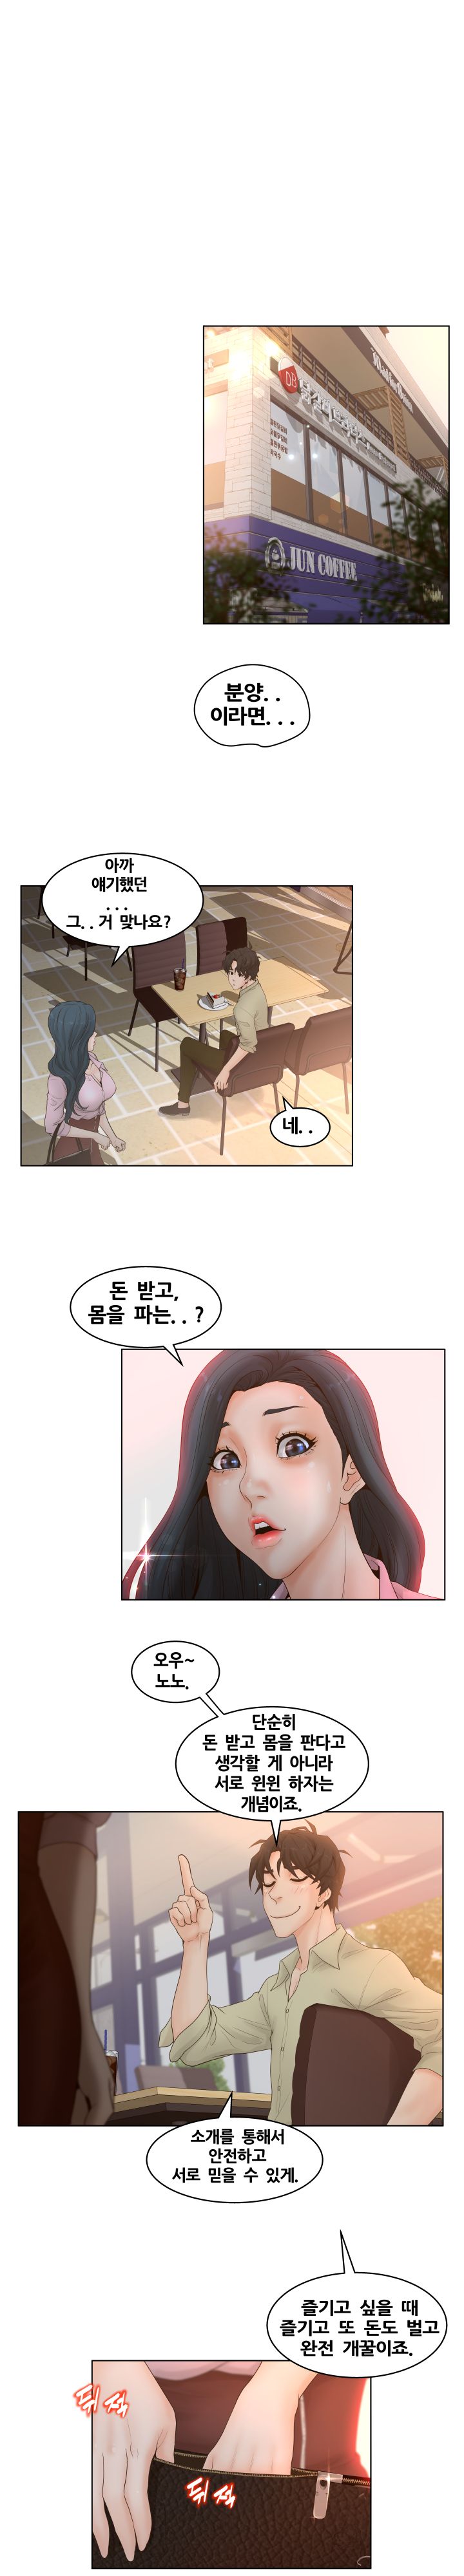 Share Girls Raw - Chapter 4 Page 1